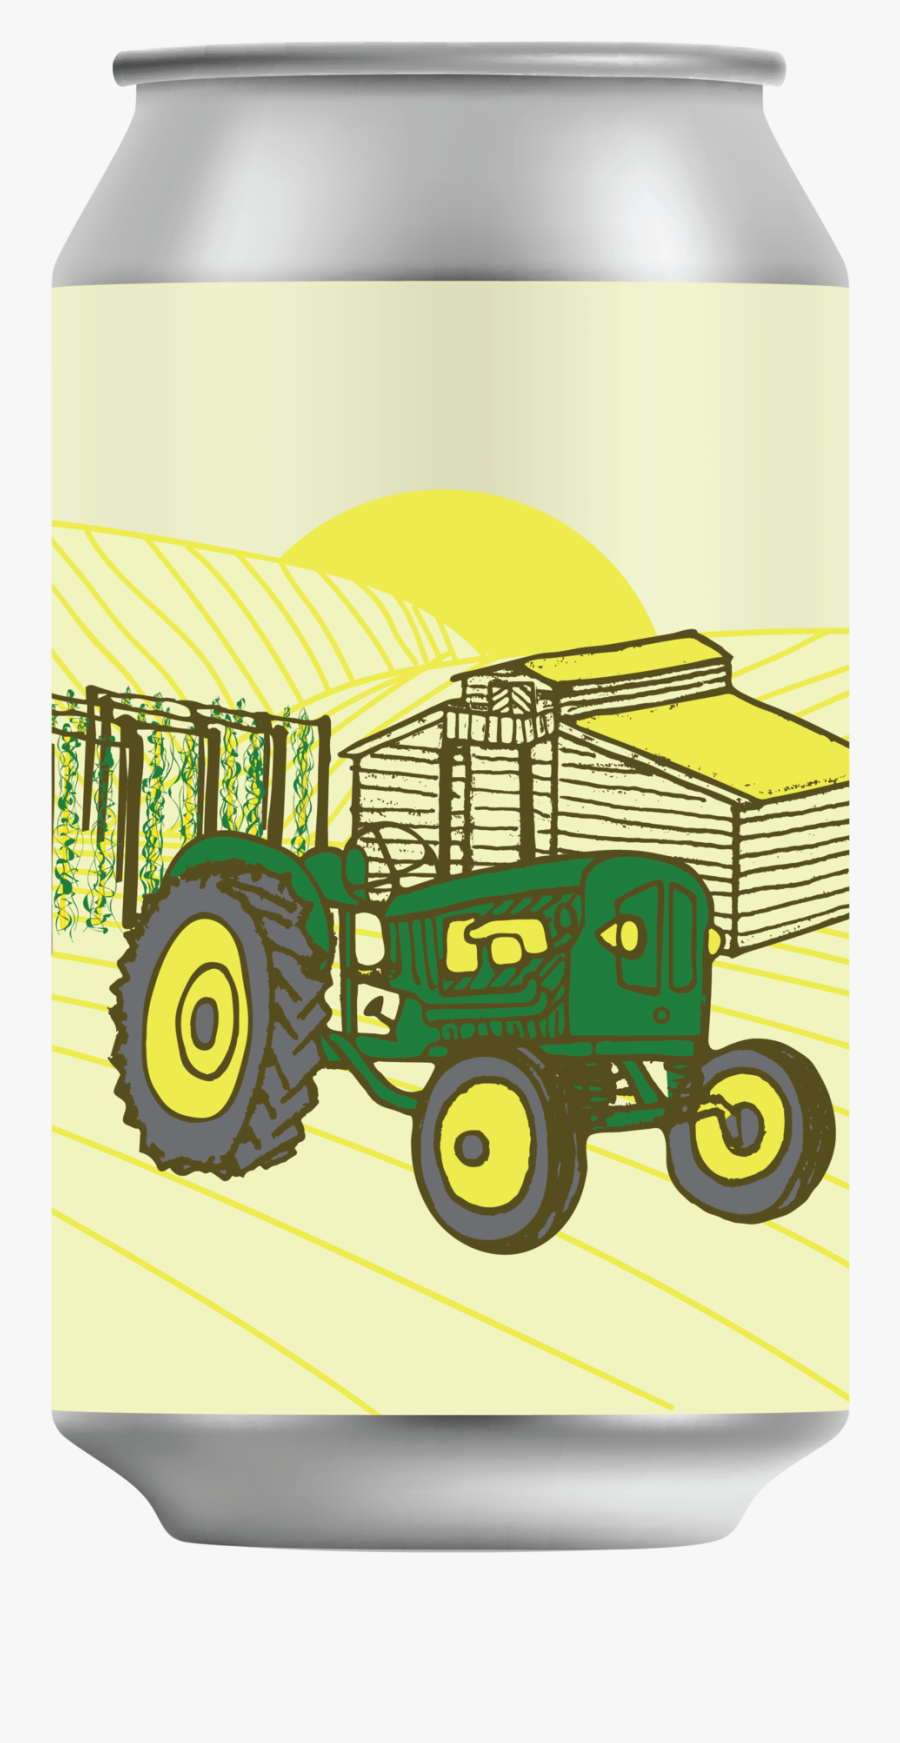 7thstatefront - Tractor, Transparent Clipart